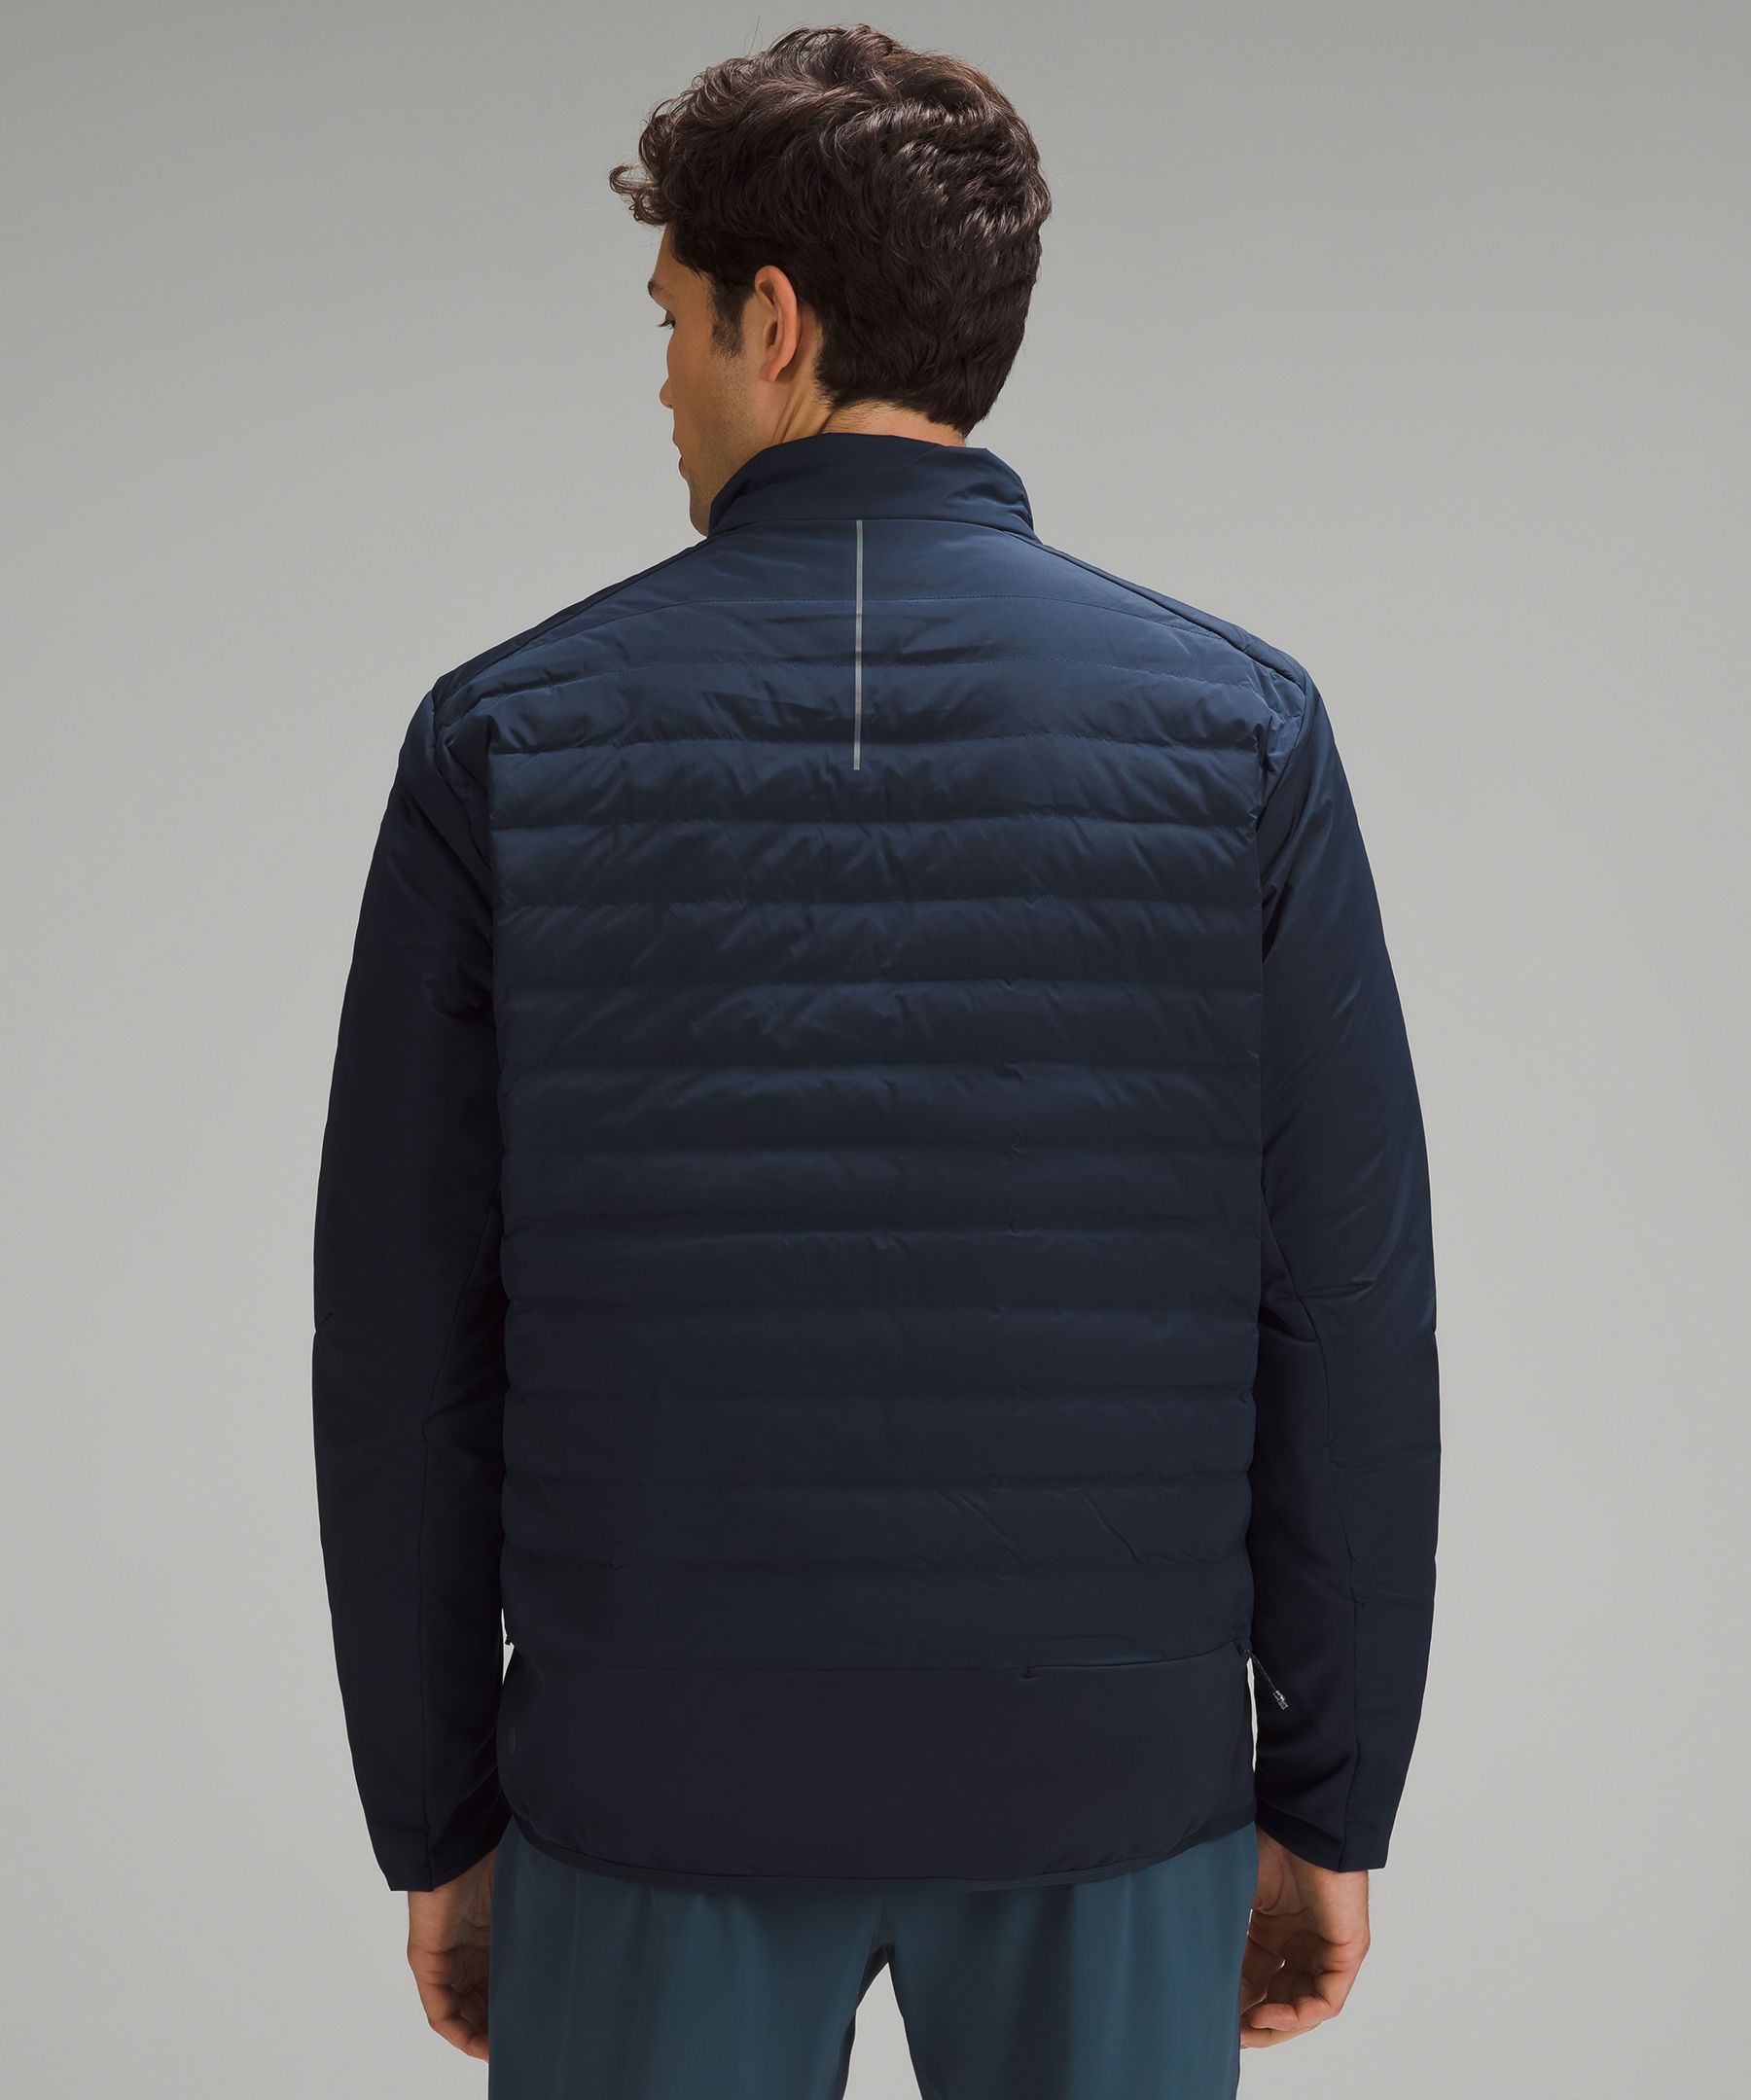 Lululemon athletica Down for It All Hoodie, Men's Coats & Jackets